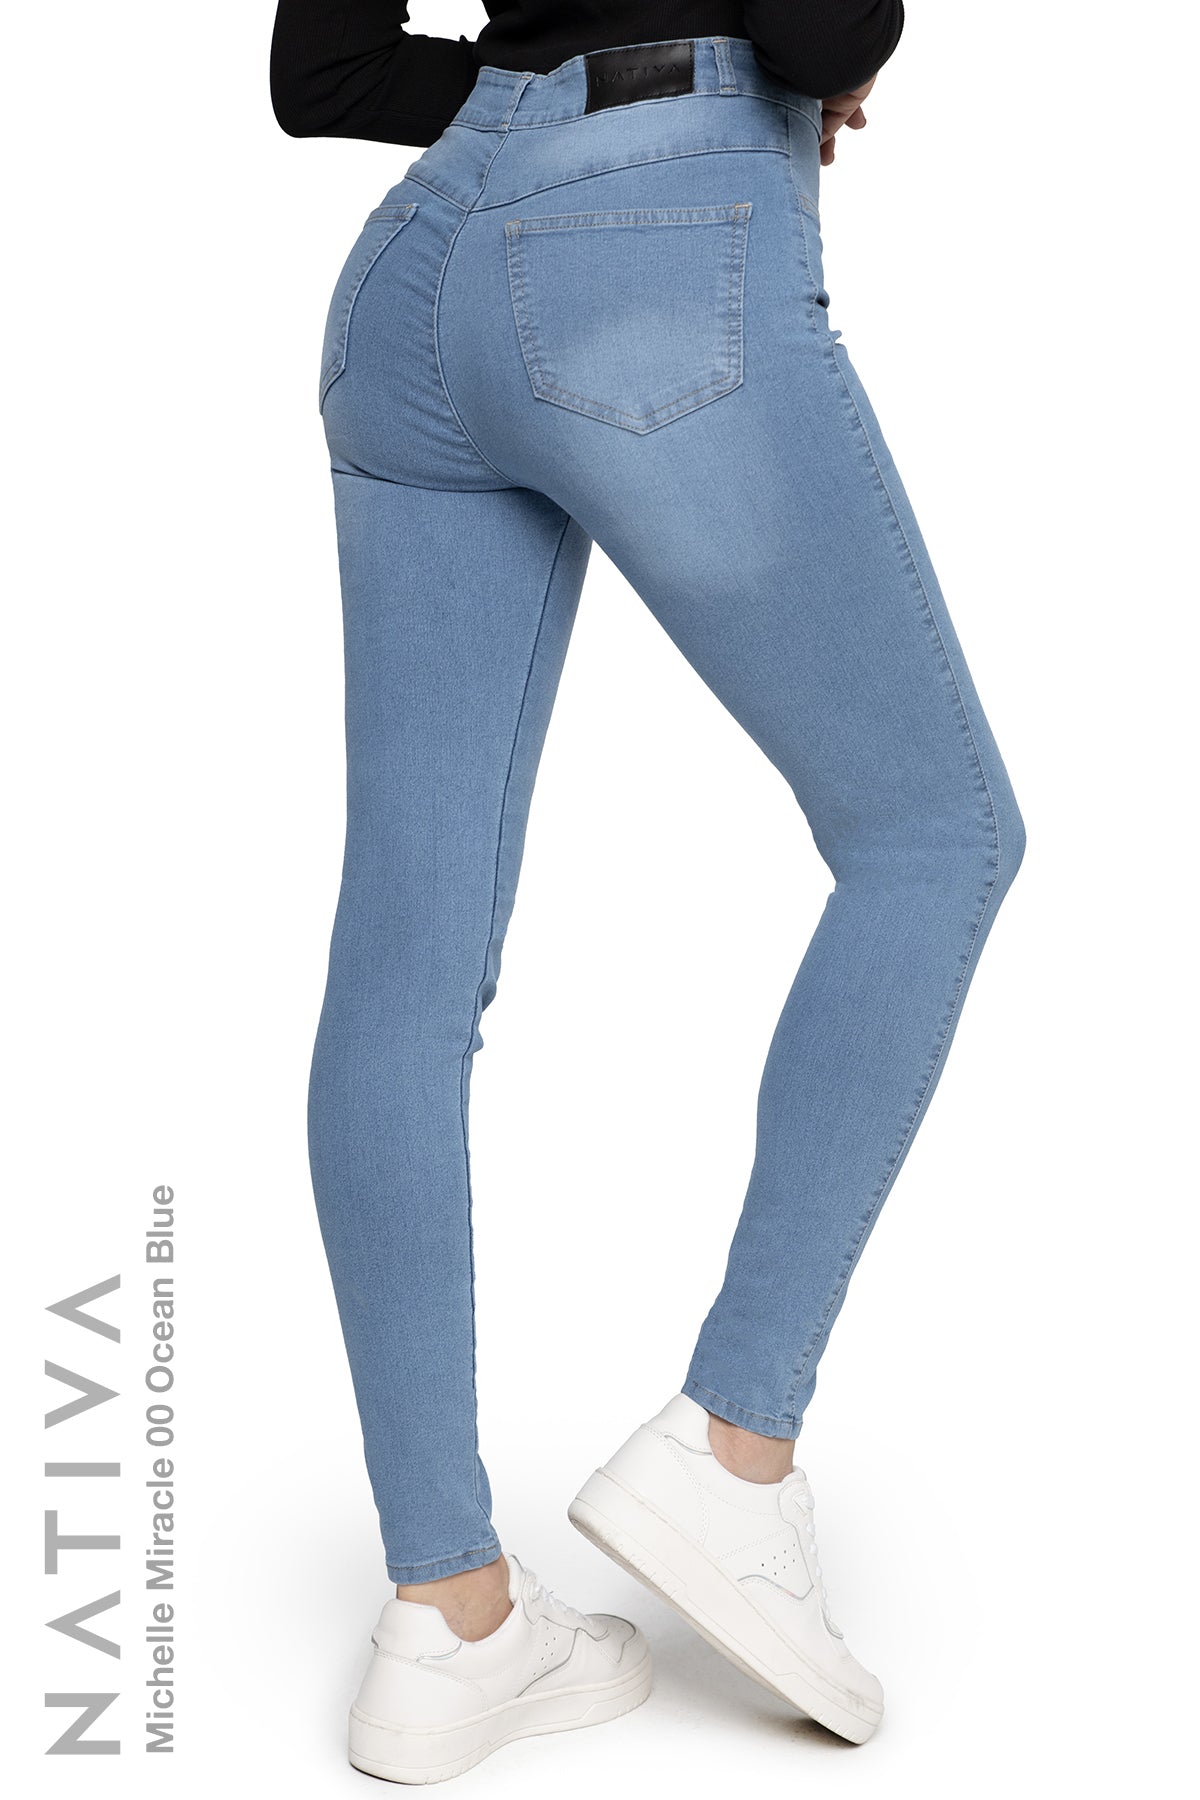 OCEAN MICHELLE BLUE, High MIRACLE Ca JEANS. NATIVA, Shaping STRETCH 00